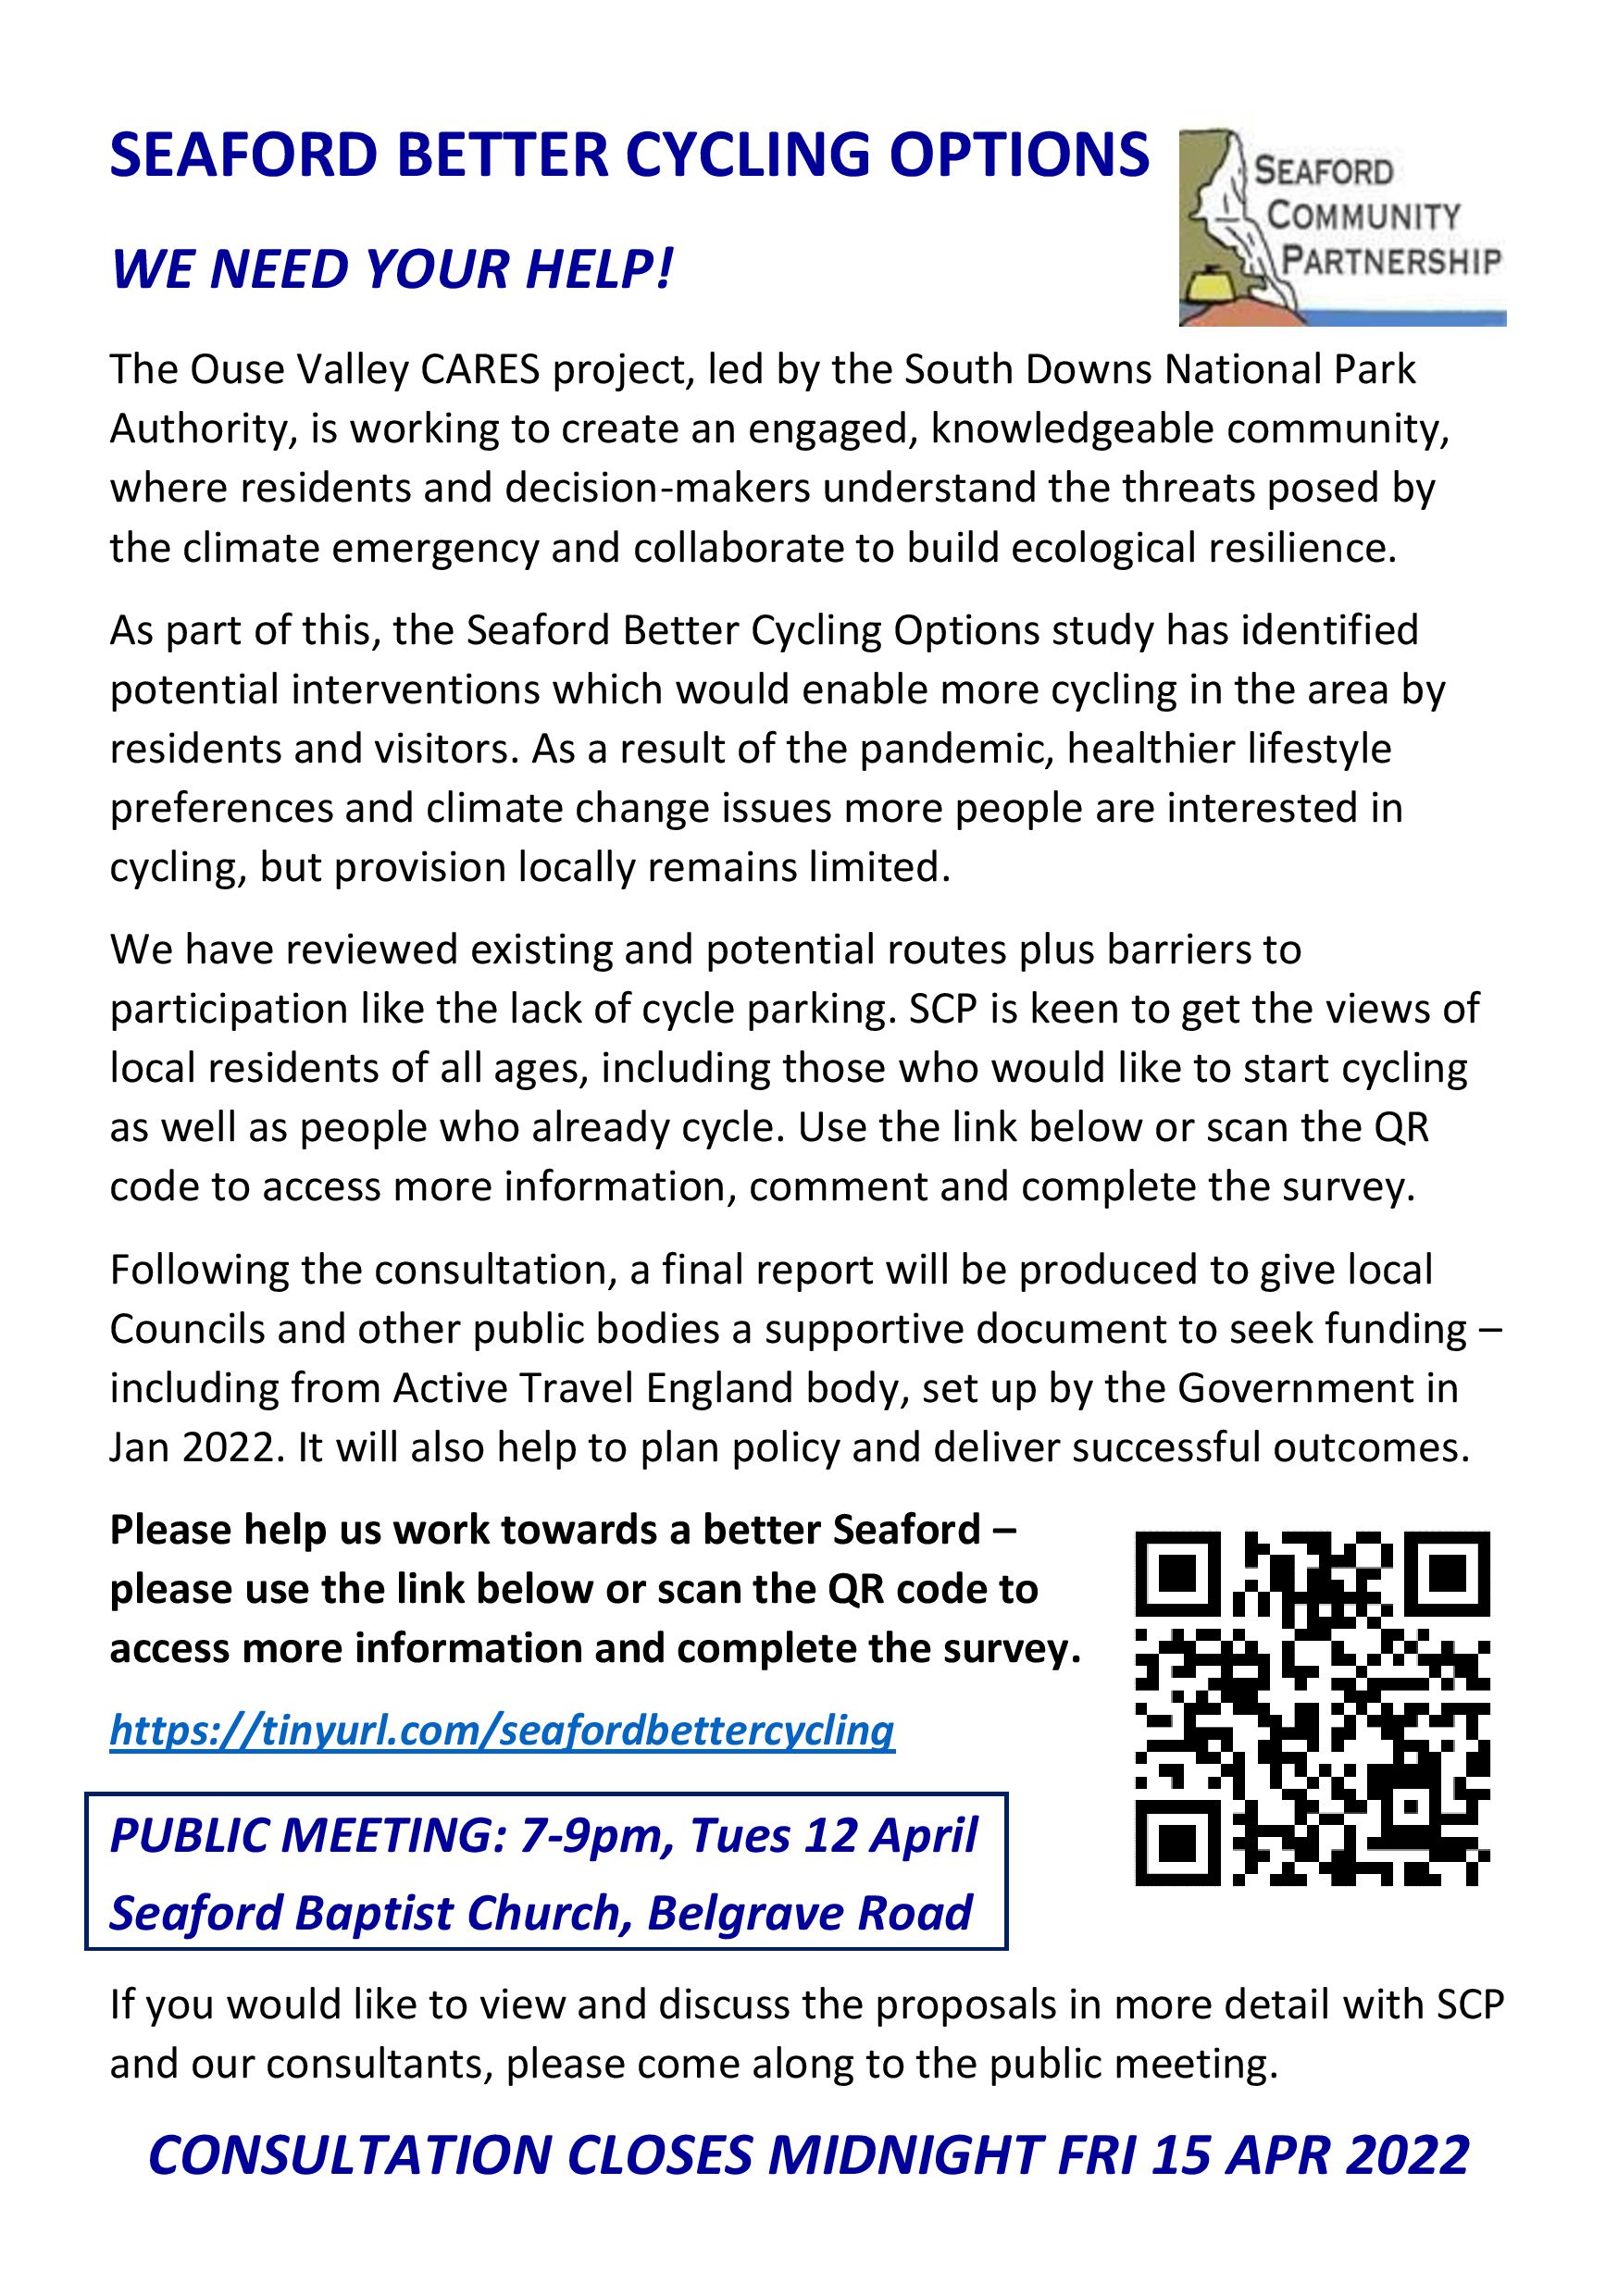 a flyer for Seaford better cycling advertising public meeting on Tuesday 12th April 2022